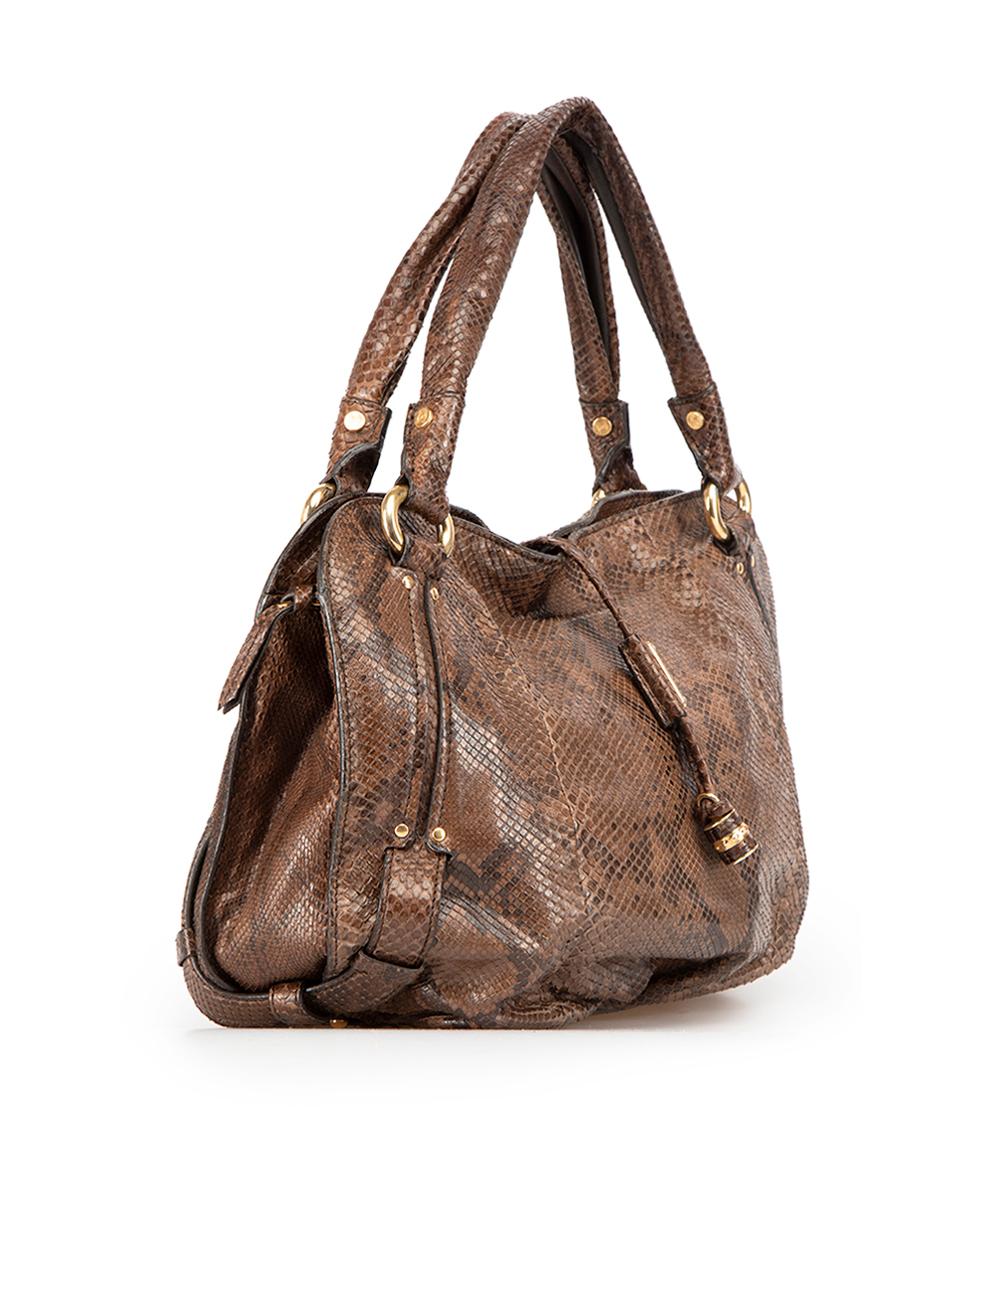 CONDITION is Very good. Minimal wear to bag is evident. Minimal wear to the base with small scuff marks and the hardware is starting to tarnish on this used Céline designer resale item.



Details


Brown

Snakeskin

Large tote bag

2x Top